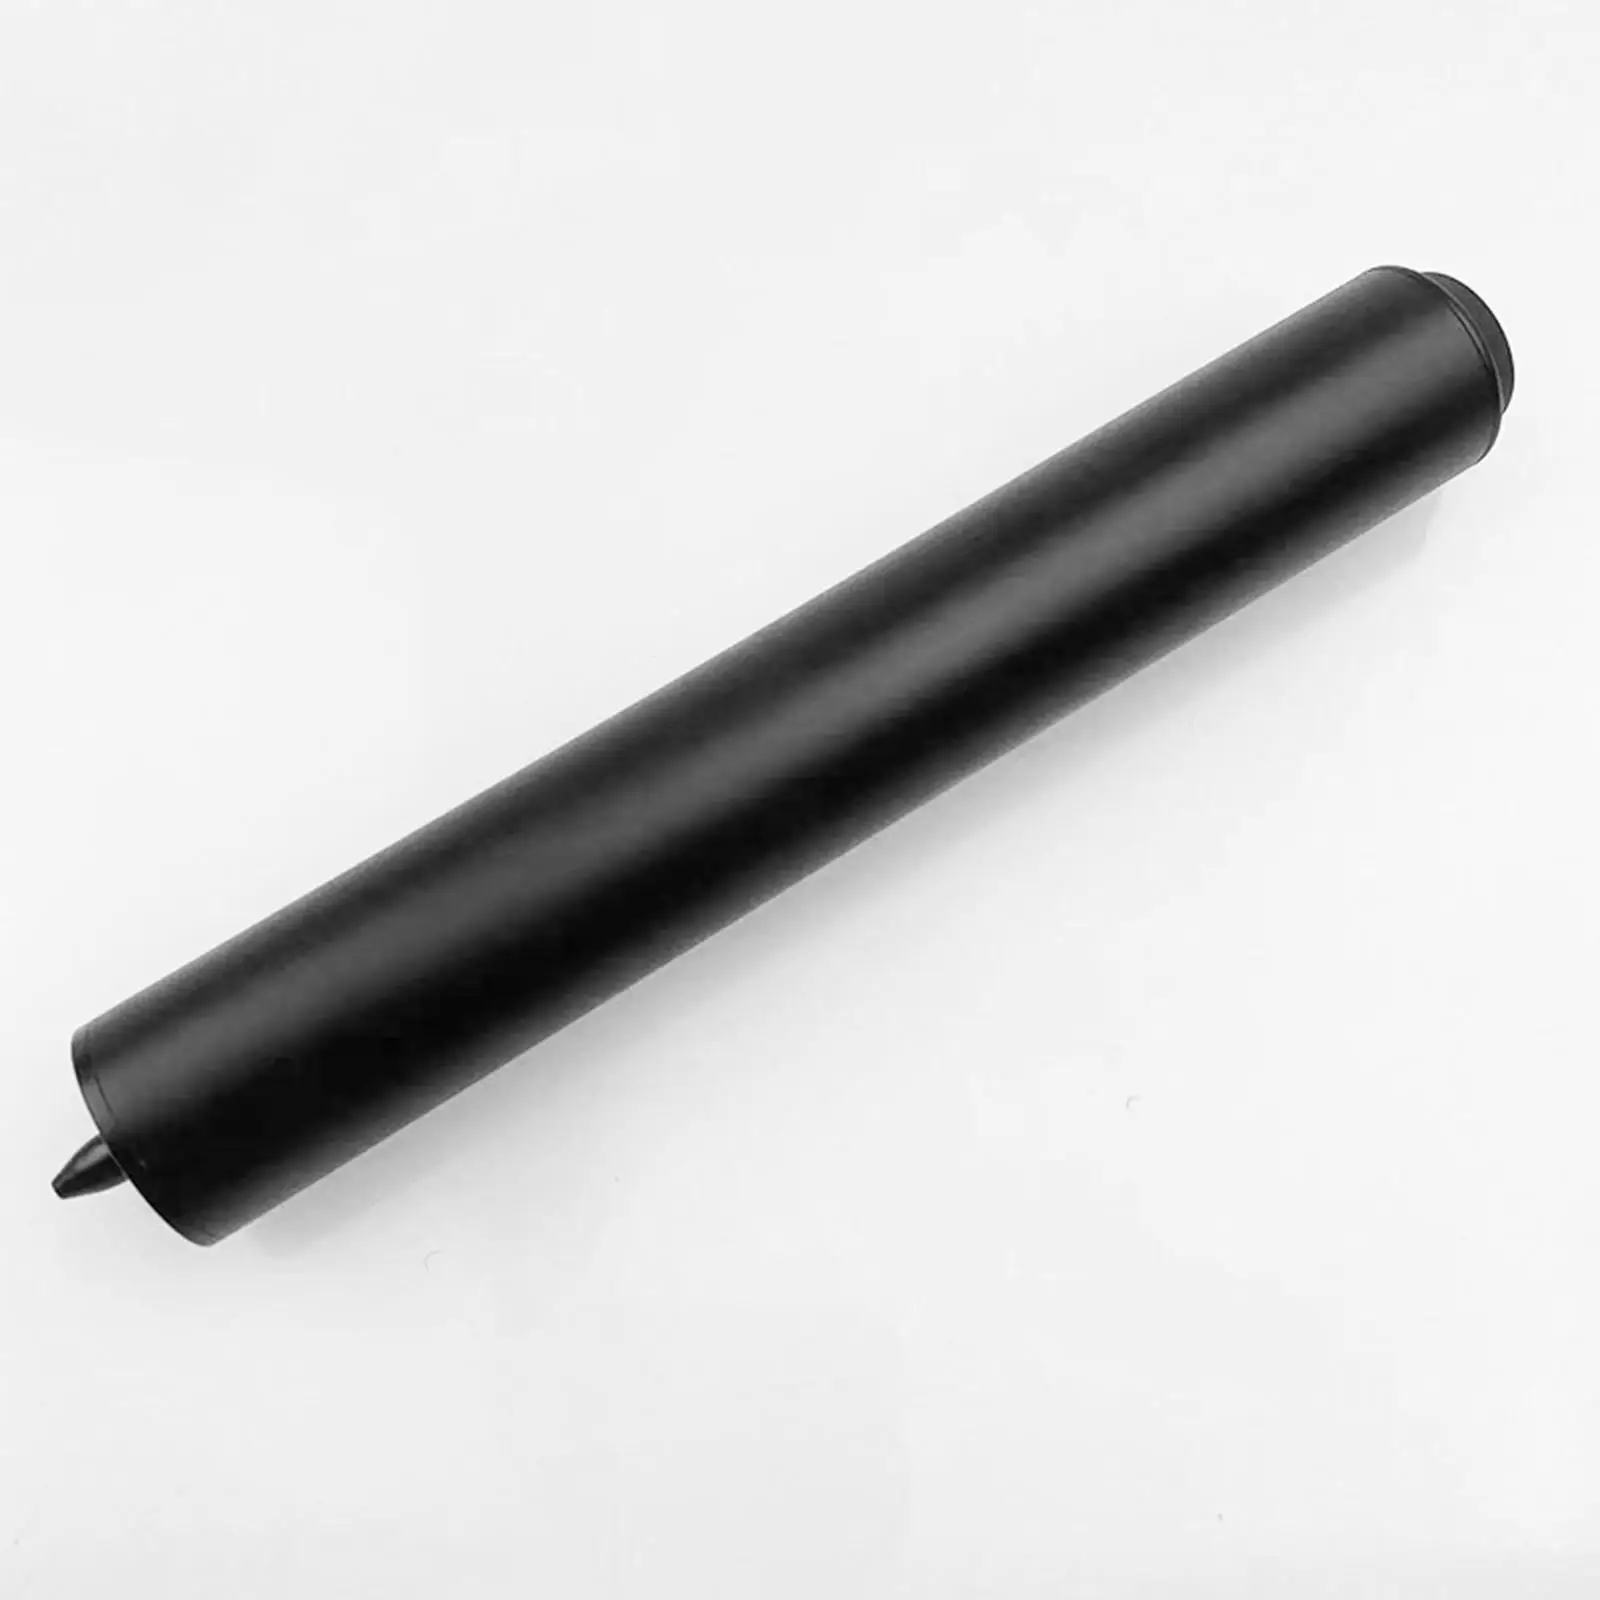 Pool Cue Extender Compact Billiard Holder Lightweight Tool Cue End Lengthener for Athlete Billiard Cues Enthusiast Snooker Parts